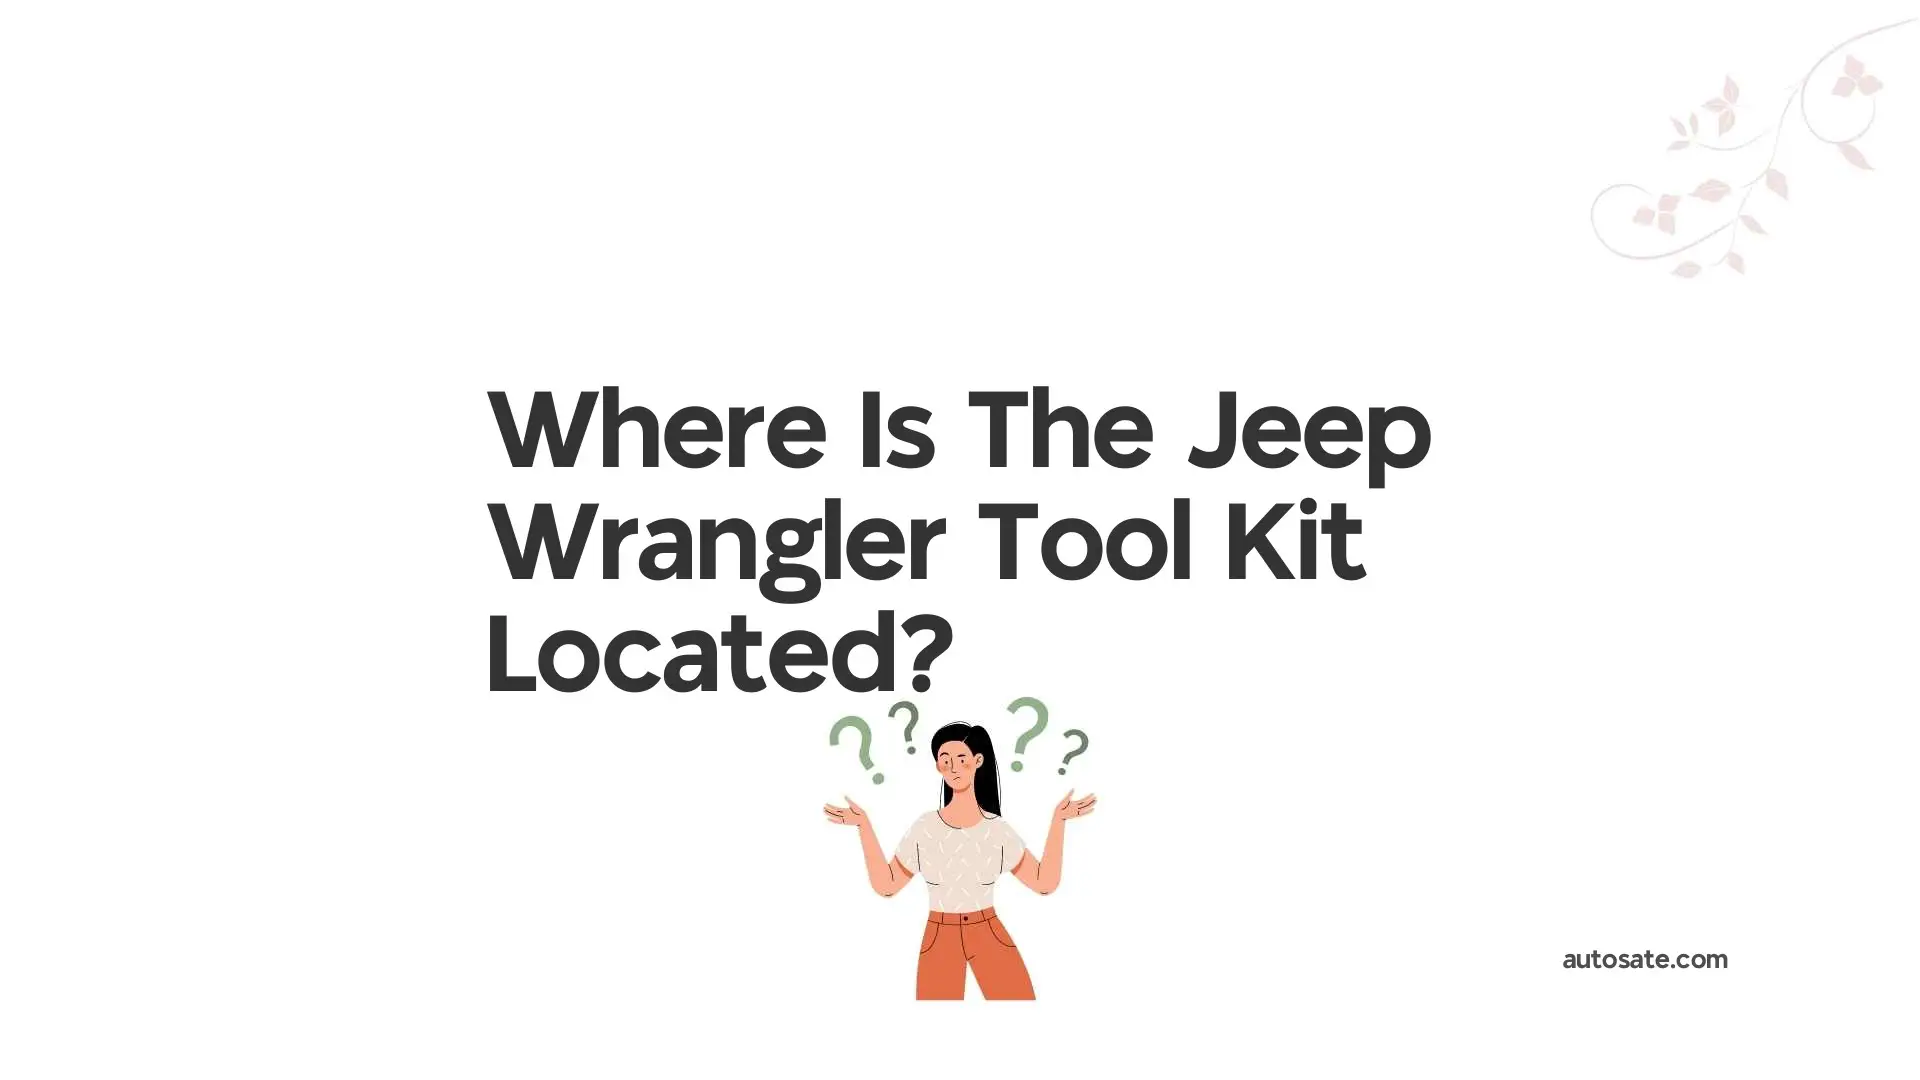 Where Is The Jeep Wrangler Tool Kit Located?